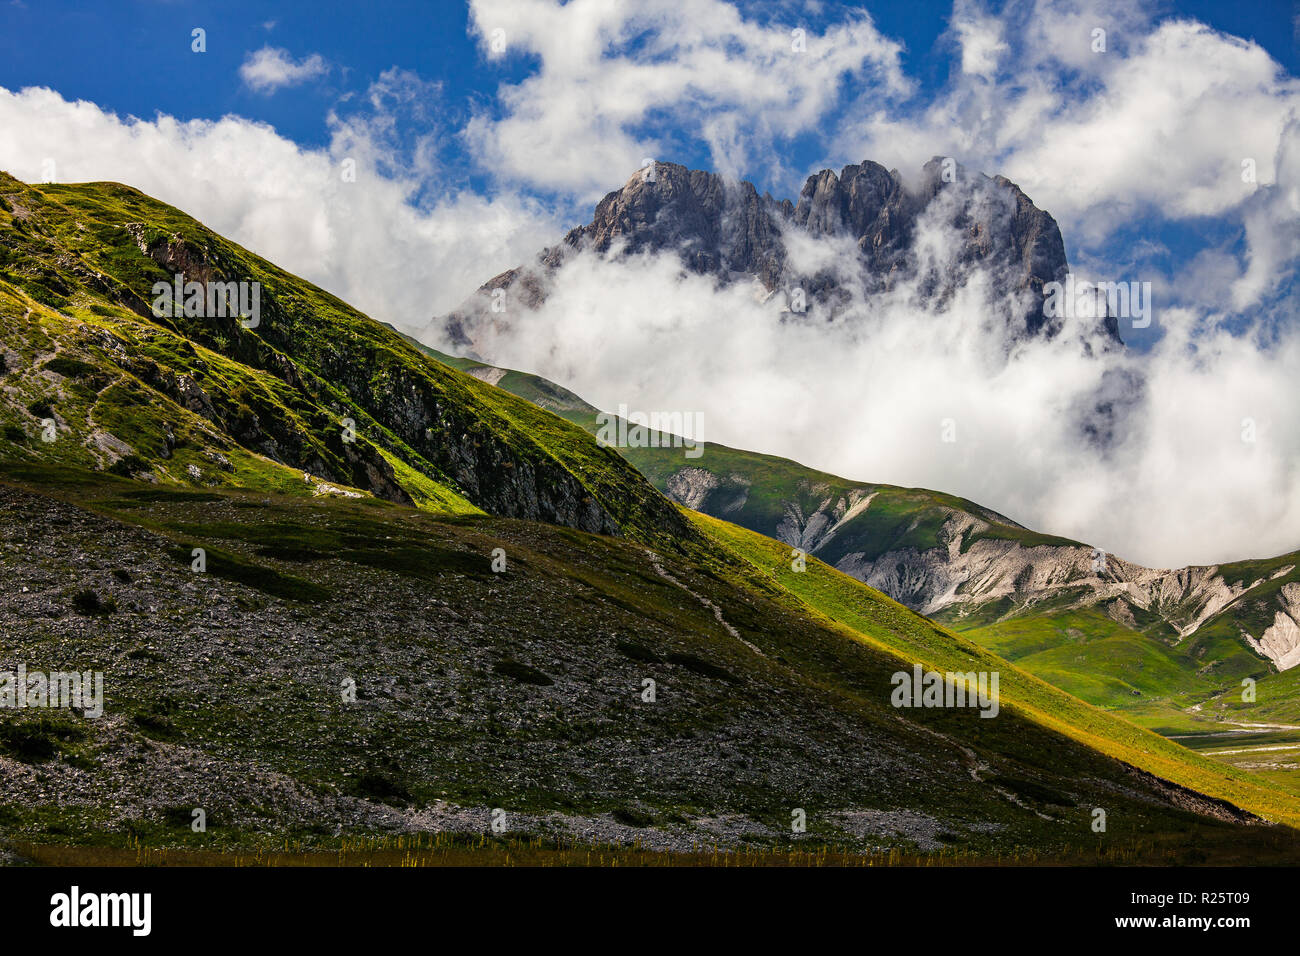 The Corno Grande, peak of the Apennines, stands out among the clouds. Abruzzo Stock Photo